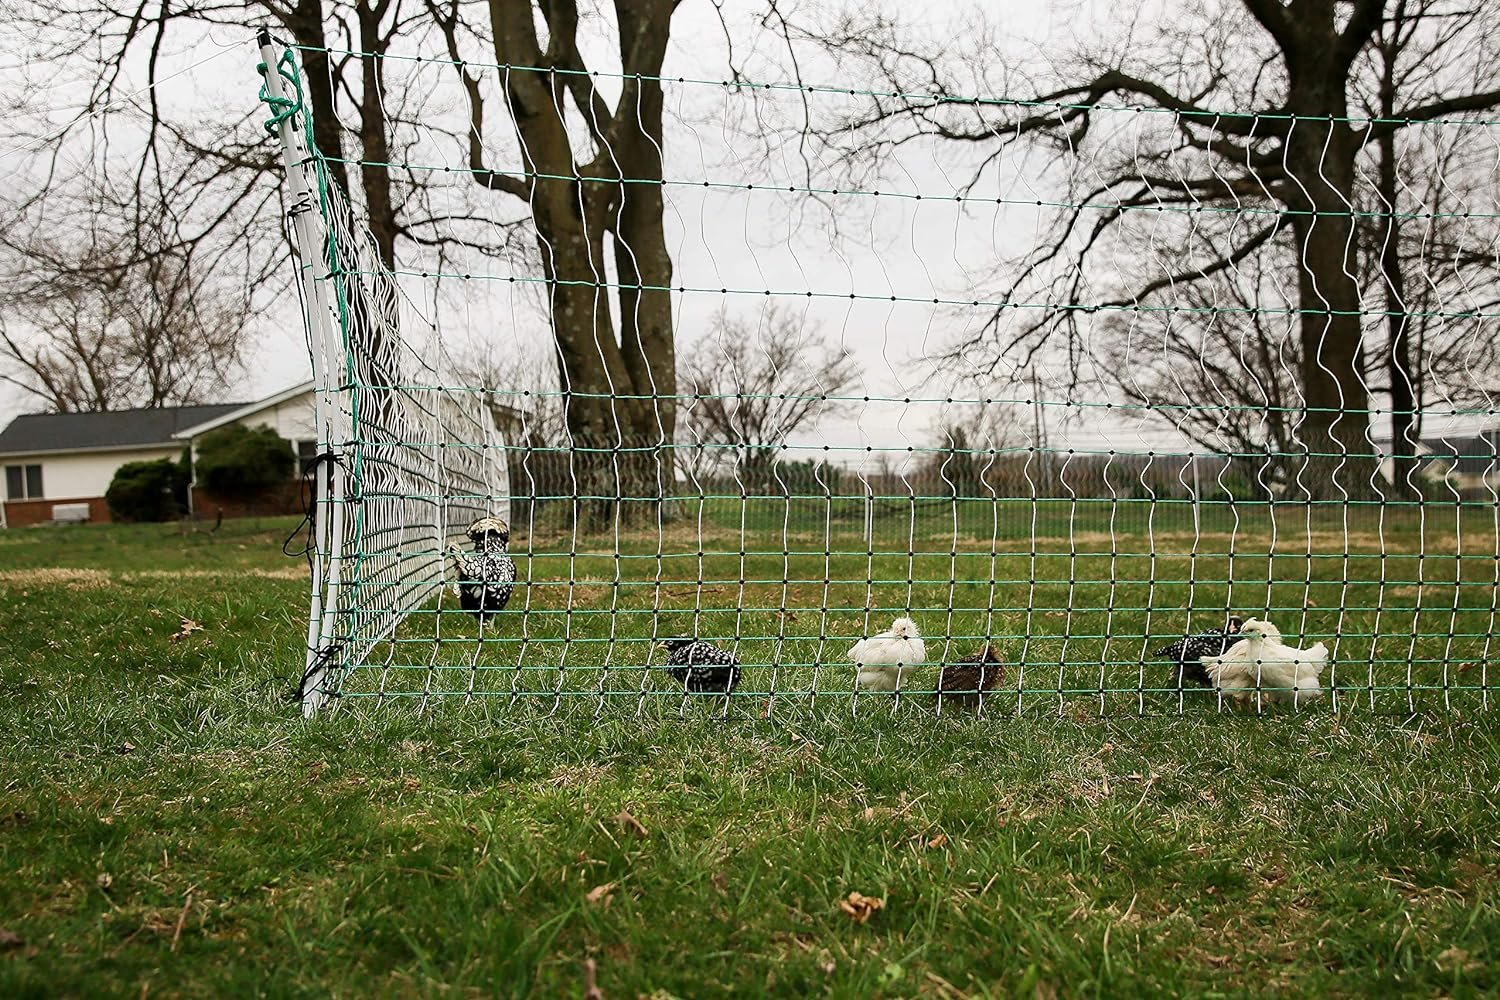 RentACoop Poultry Netting Electric Fence - Electric Poultry Enclosure for Chickens, Ducks, Turkeys - Suitable for 4 Week Old Chickens/Older and Adult Poultry - Energizer Not Included - 168 L x 48 H